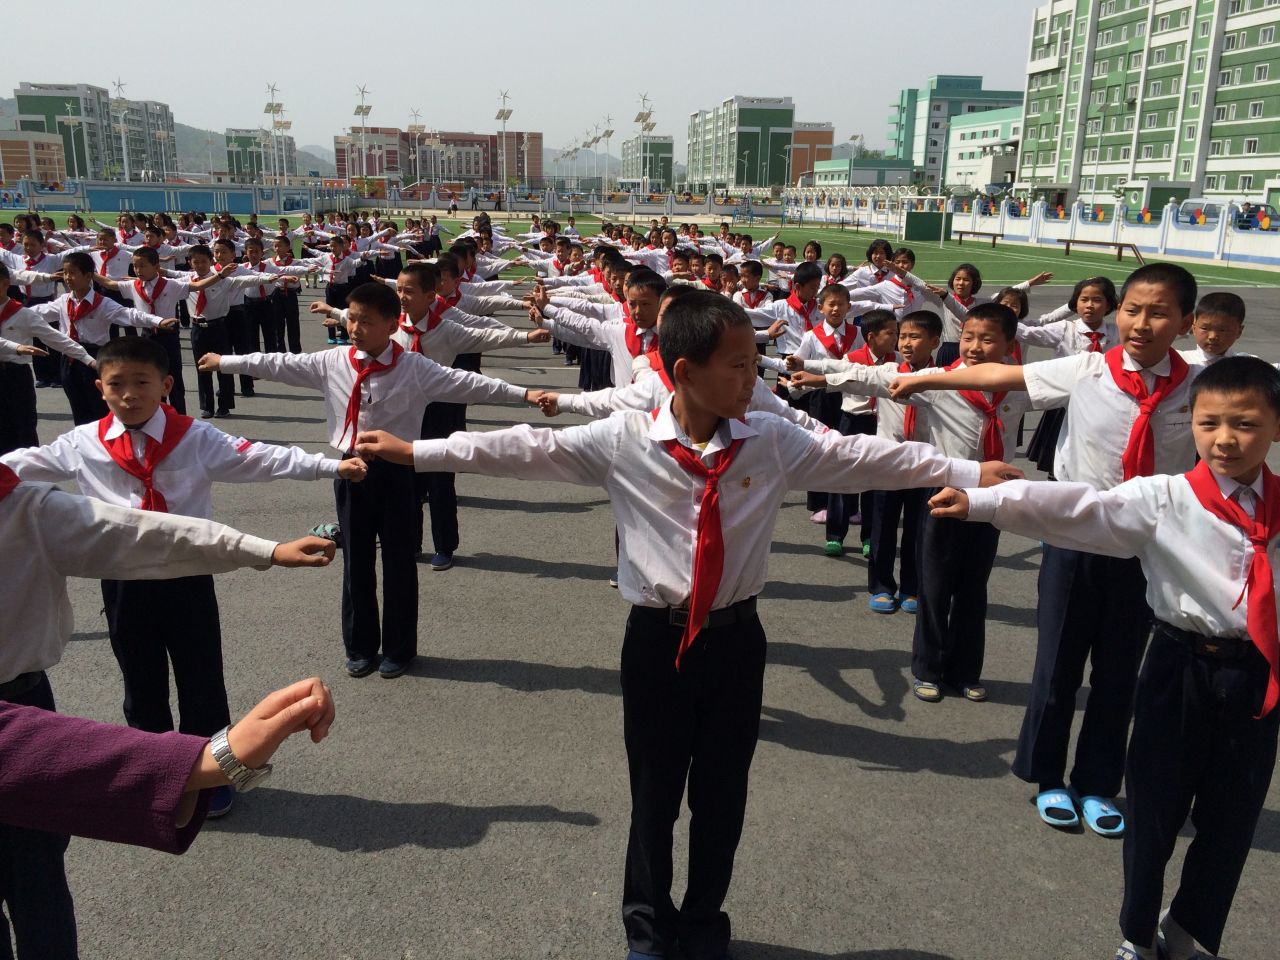 Outdoor exercise accompanied by upbeat music is a daily routine for these North Korean middle school students. Afterward, classes are critiqued on their coordination. 